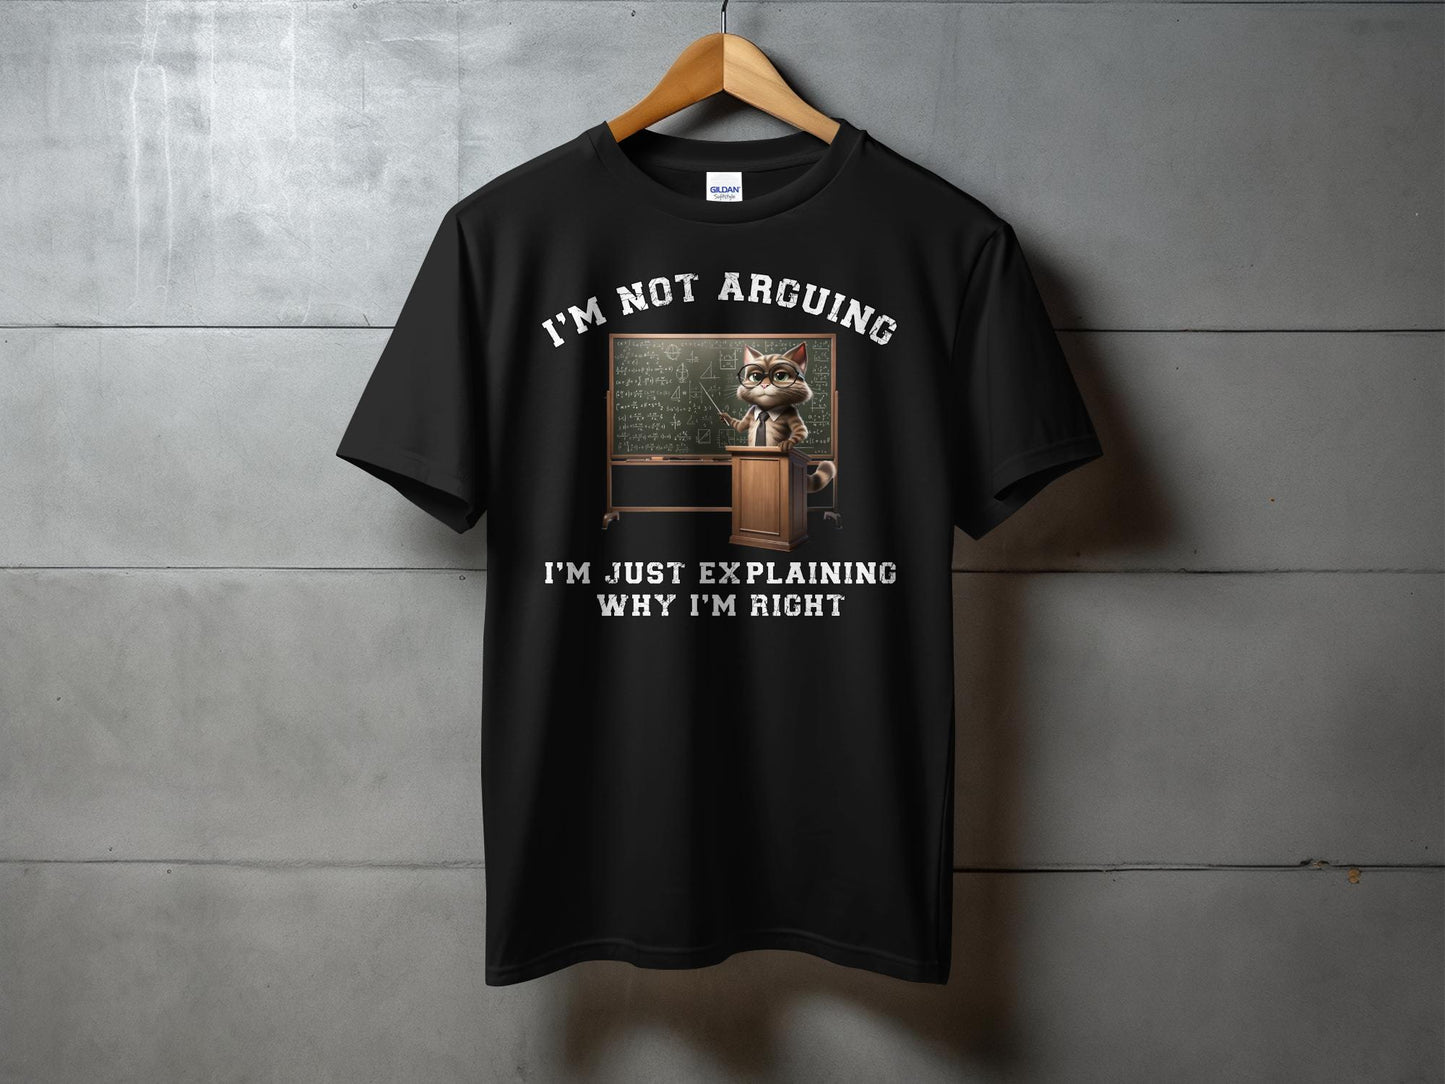 Funny Cat T-Shirt, I'm Not Arguing Quote, Educator Gift, Classroom Humor Tee, Science Chalkboard, Unisex Shirt Softstyle